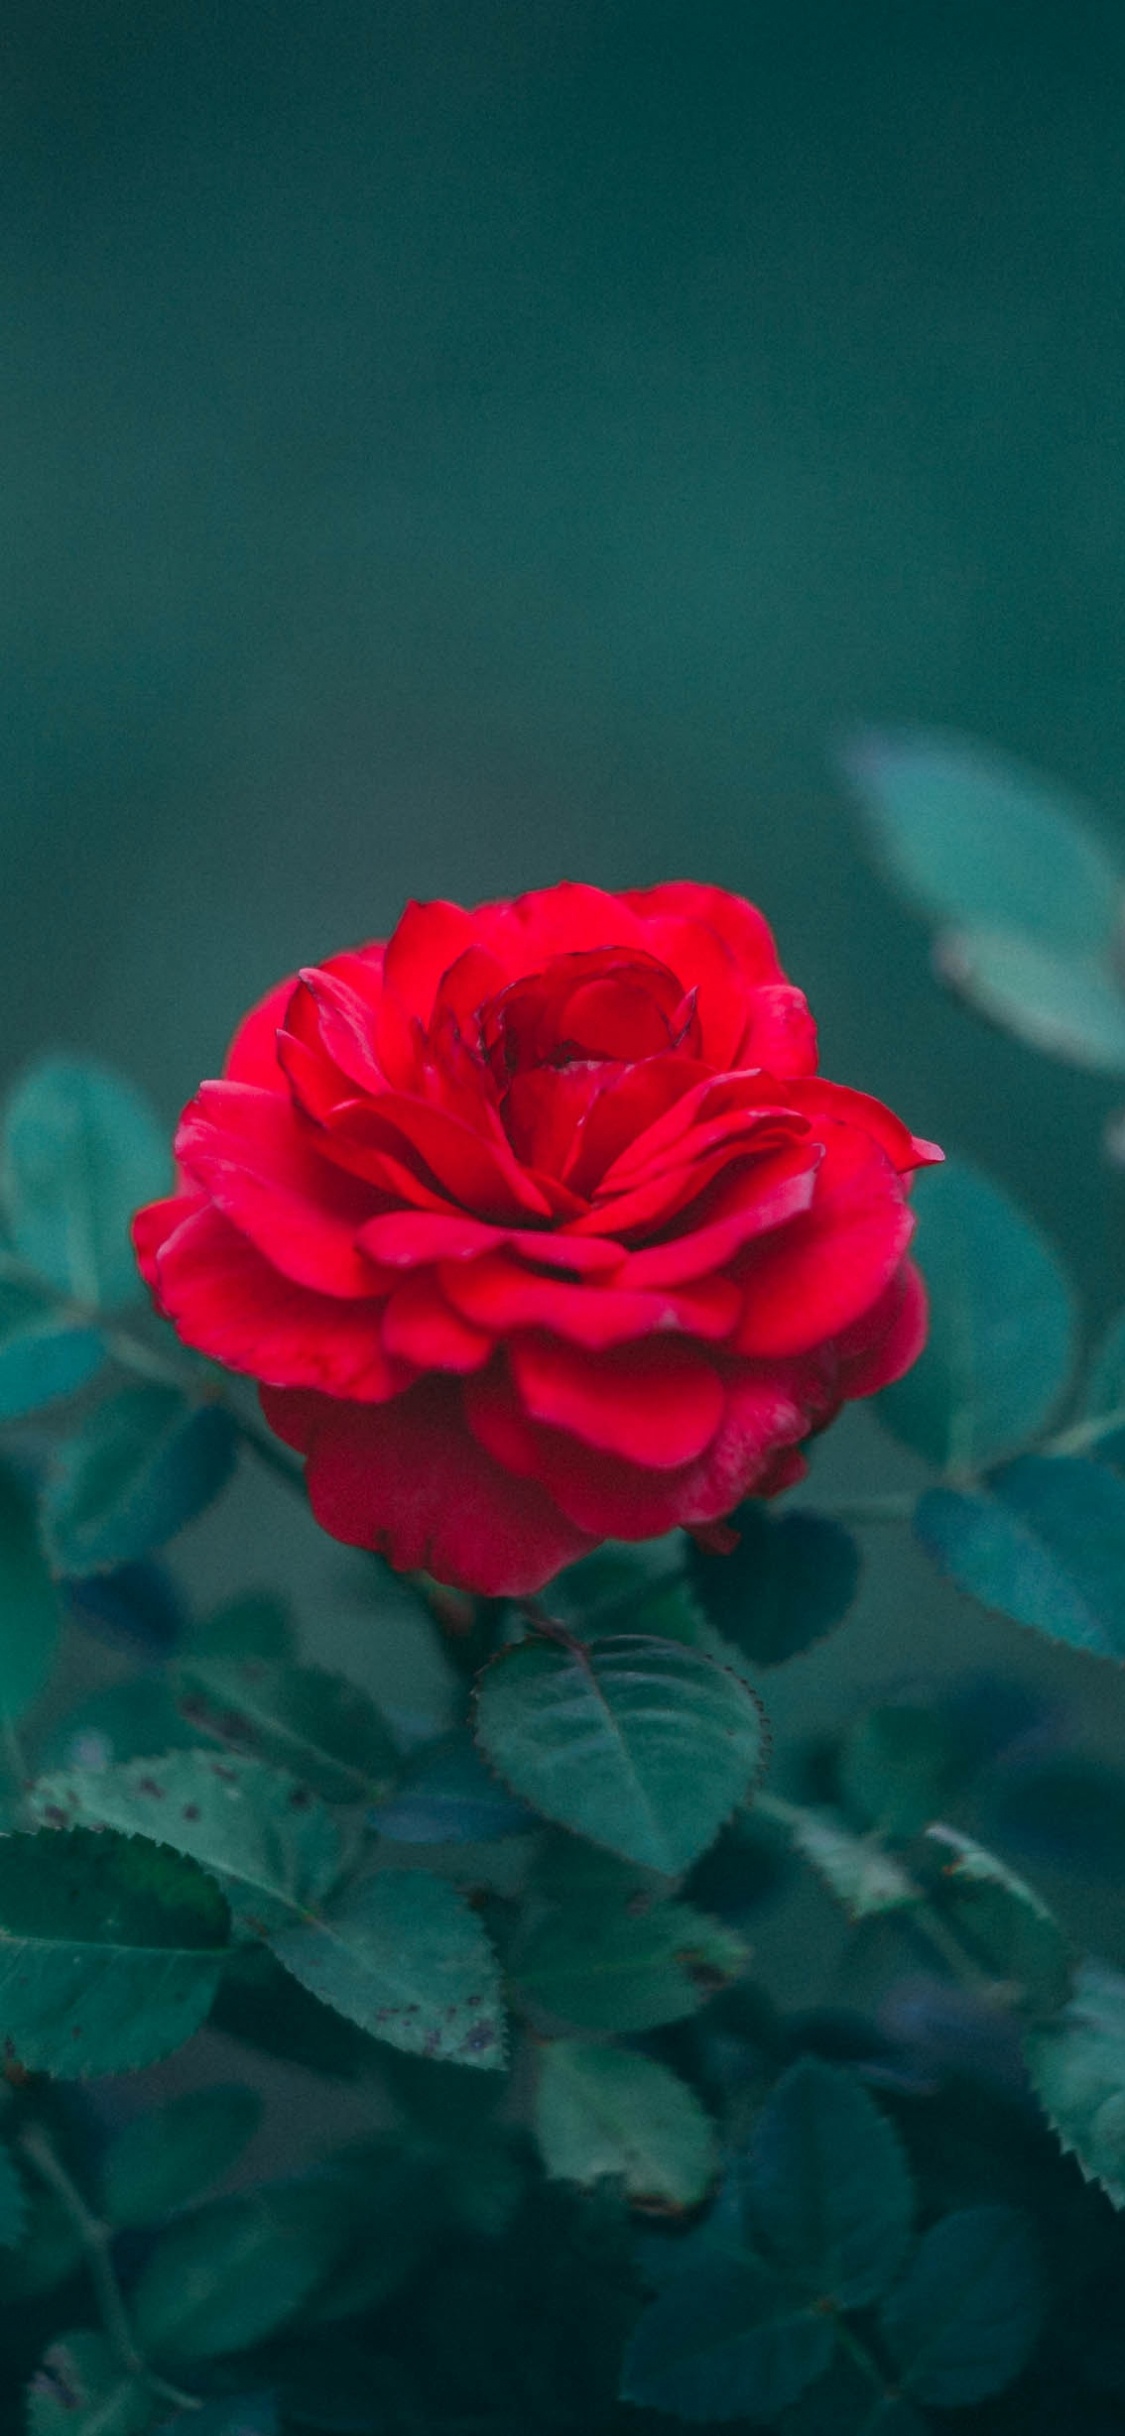 Red Rose in Bloom During Daytime. Wallpaper in 1125x2436 Resolution